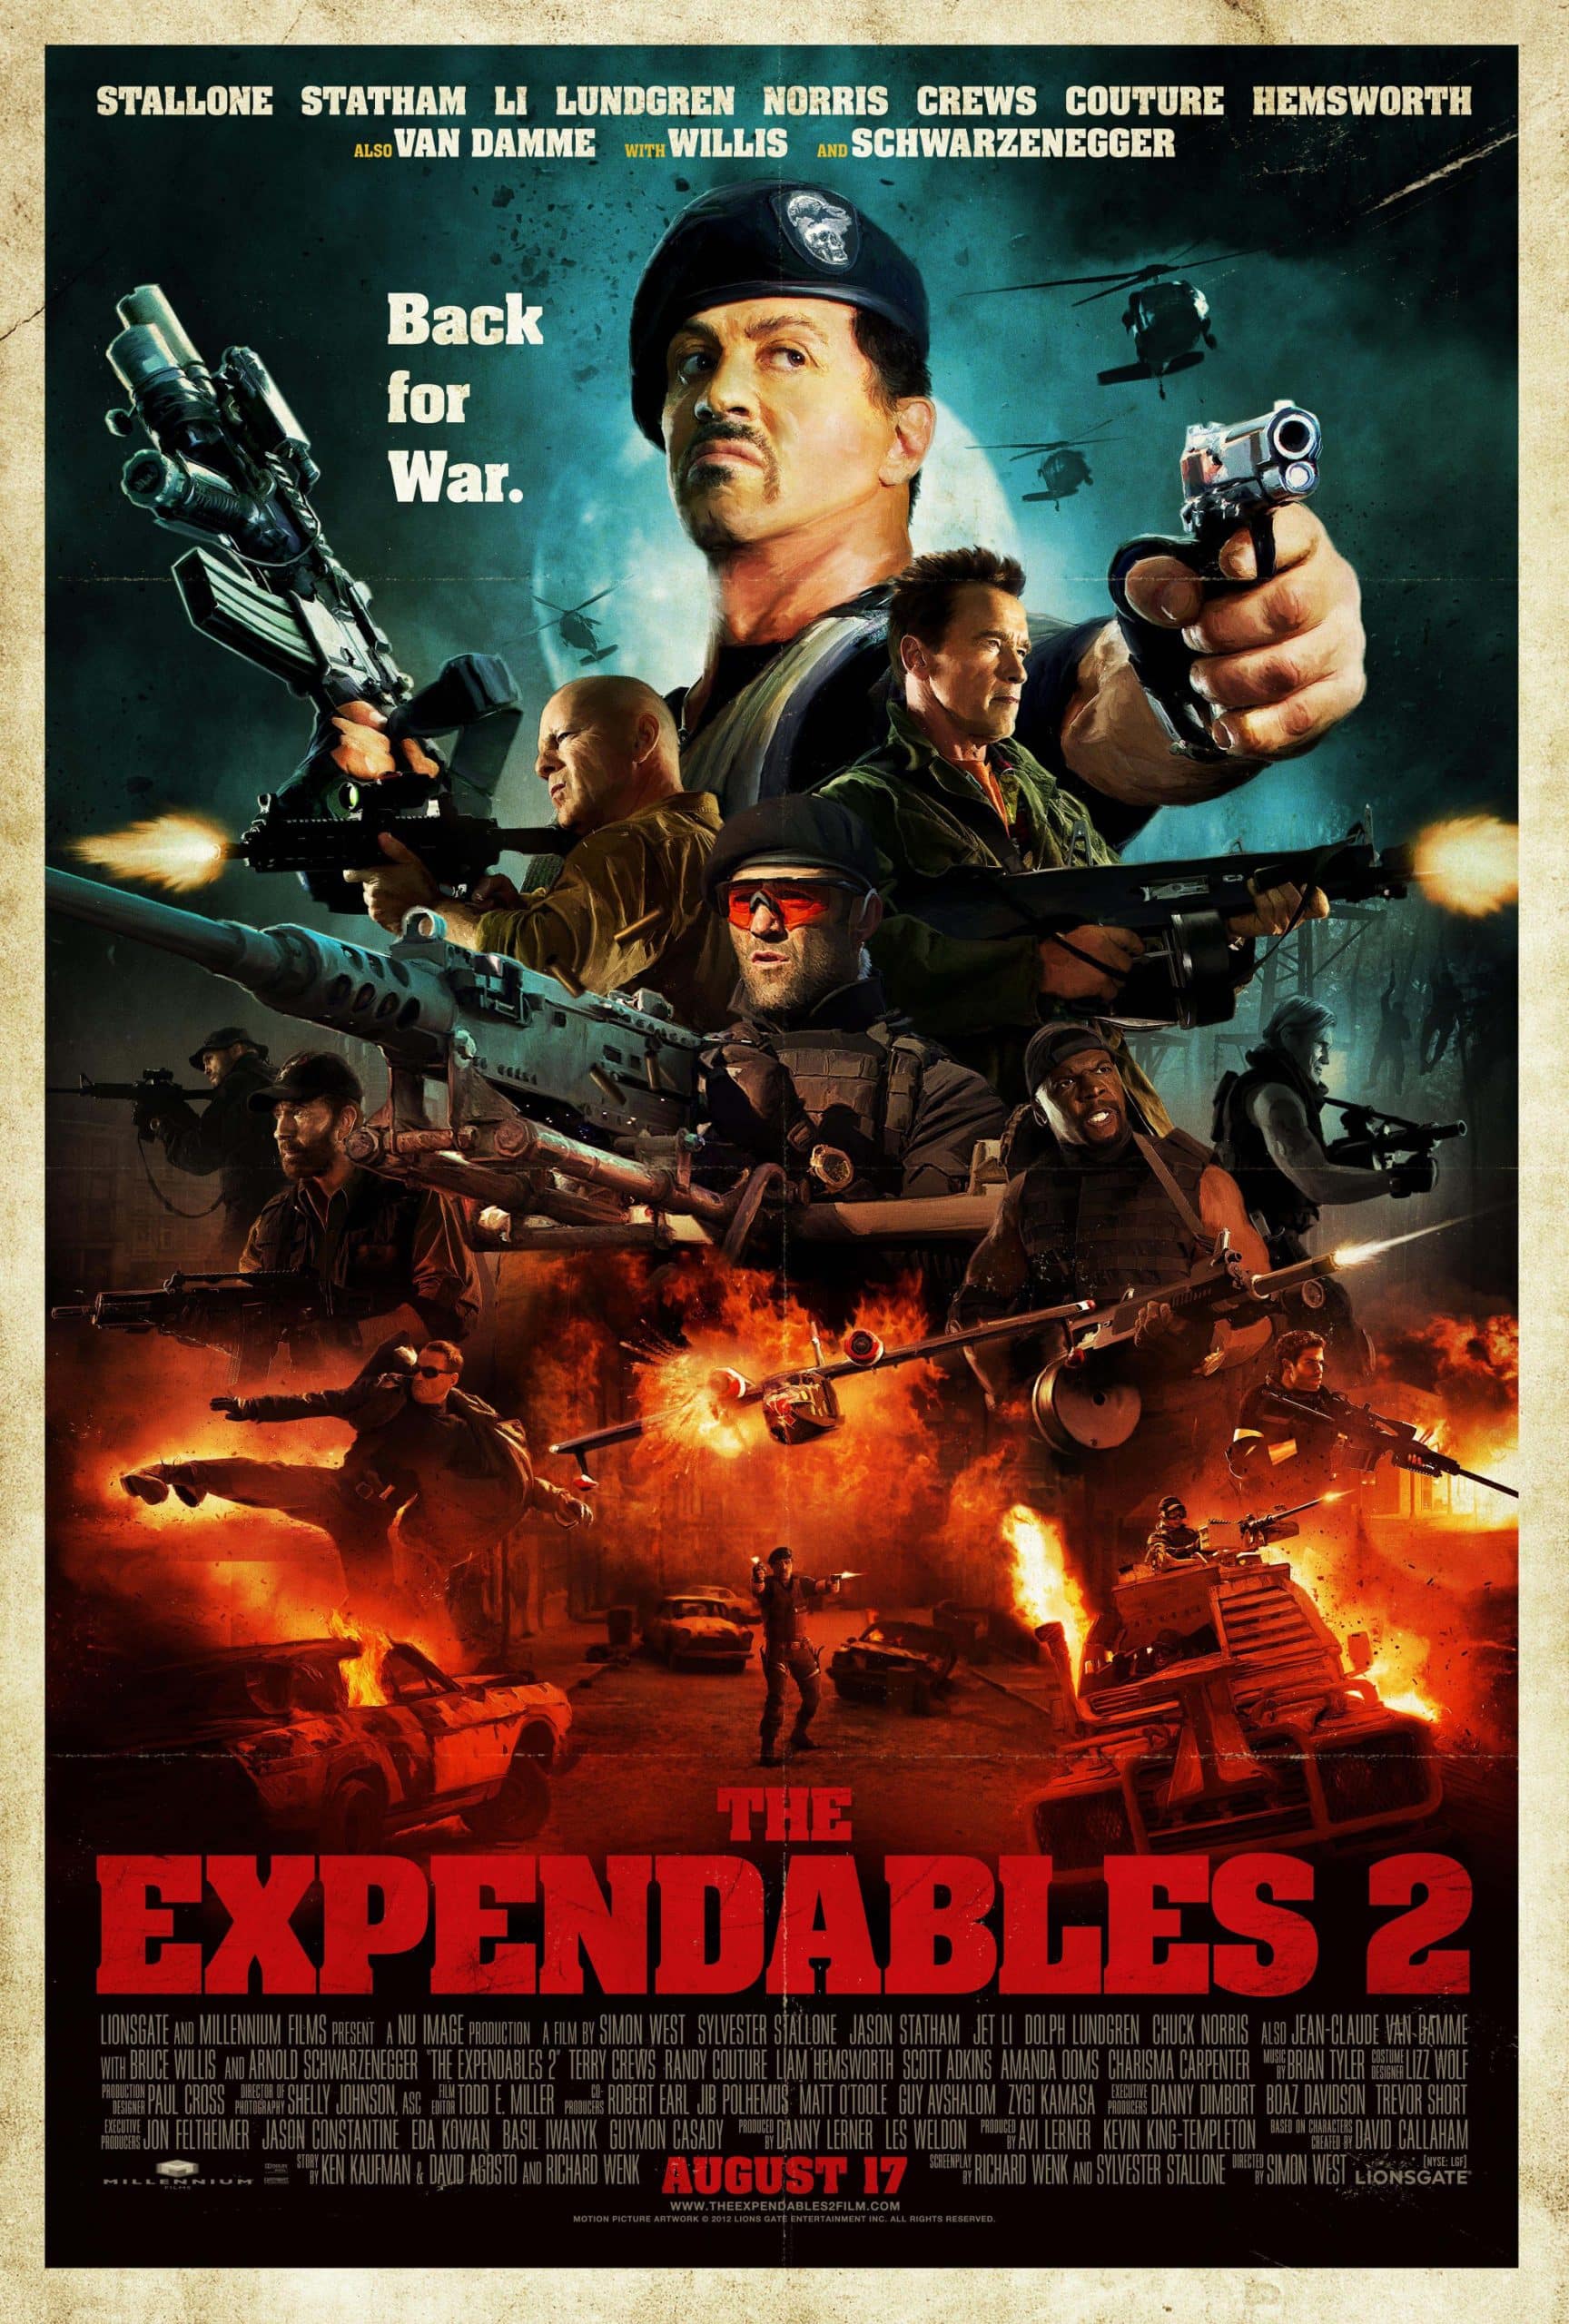 THE EXPENDABLES 2, US poster art, top 4, clockwise from top: Sylvester Stallone, Arnold Schwarenegger, Jason Statham, Bruce Willis; others, clockwise from far right: Dolph Lundgren, Terry Crews, Liam Hemsworth, Jet LI, Sylvester Stallone, Jean-Claude Van Damme, Chuck Norris, Randy Couture, 2012